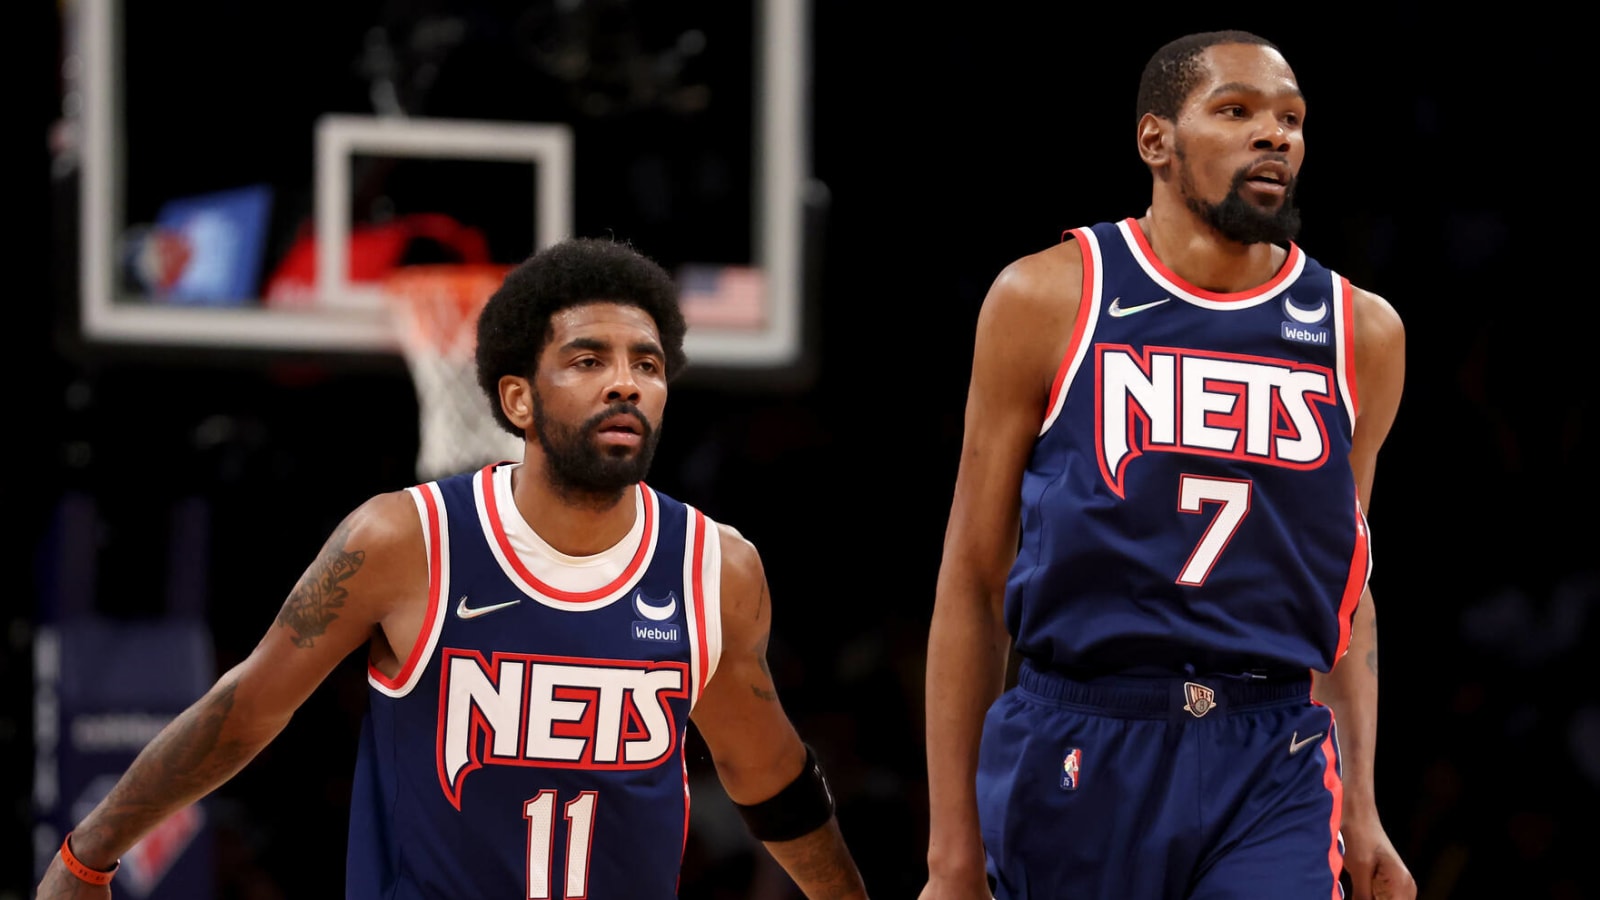 Report: Nets still in trade talks after trading Kyrie Irving, Kevin Durant